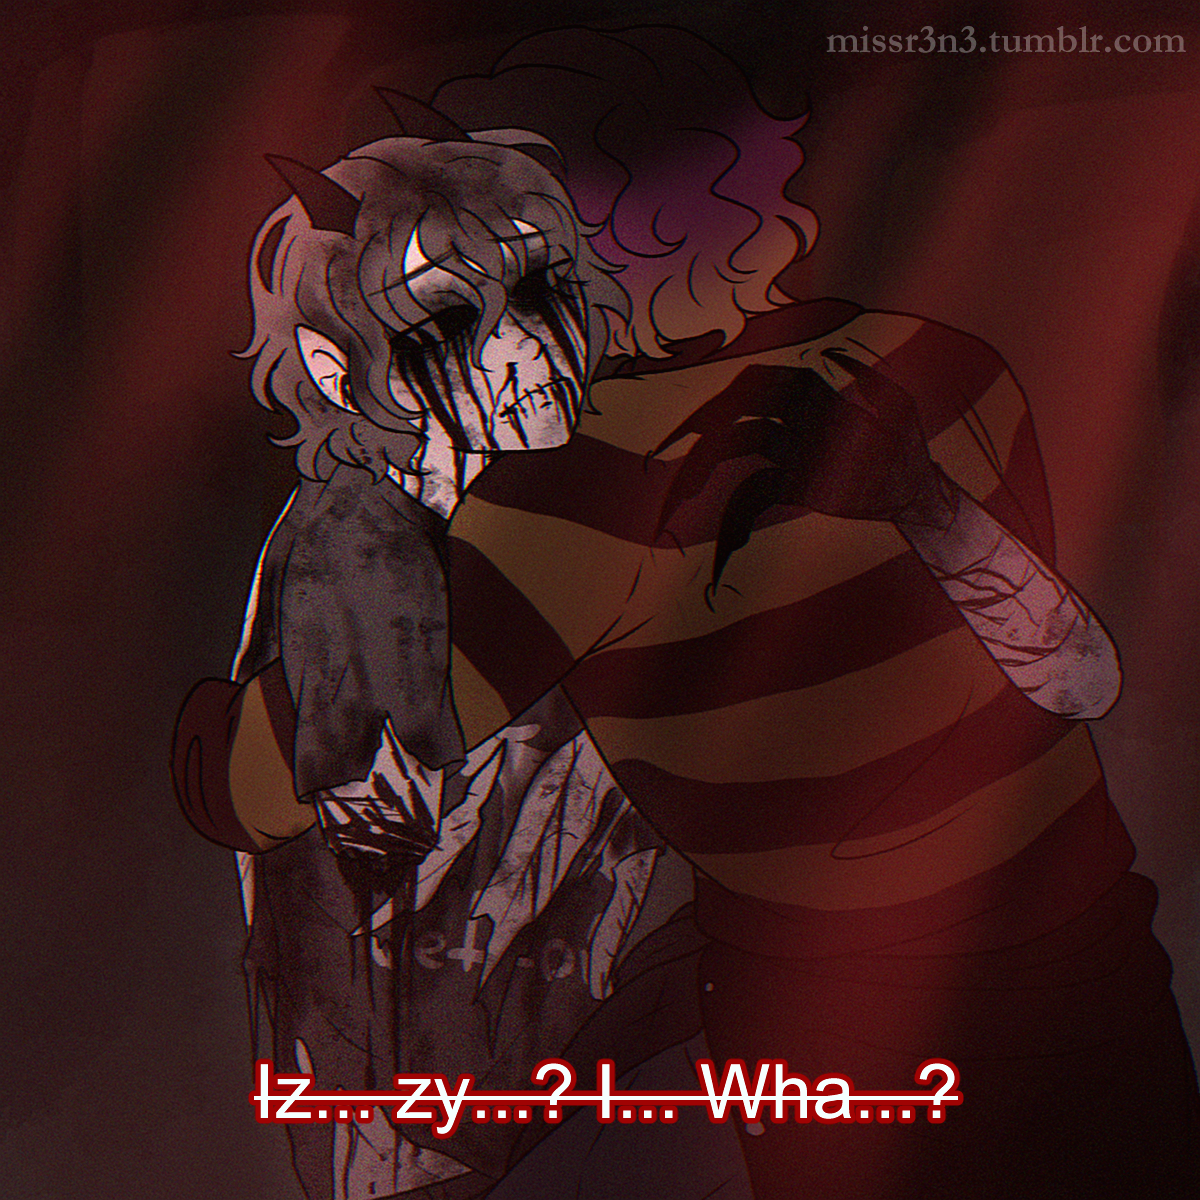 joshua and isaac embrace each other after joshua escapes the nightmare sand pit. joshua faces the camera while isaac's back is turned. text on the bottom of the image styled after anime fansubs reads: 'Iz... zy? I... Wha...?'